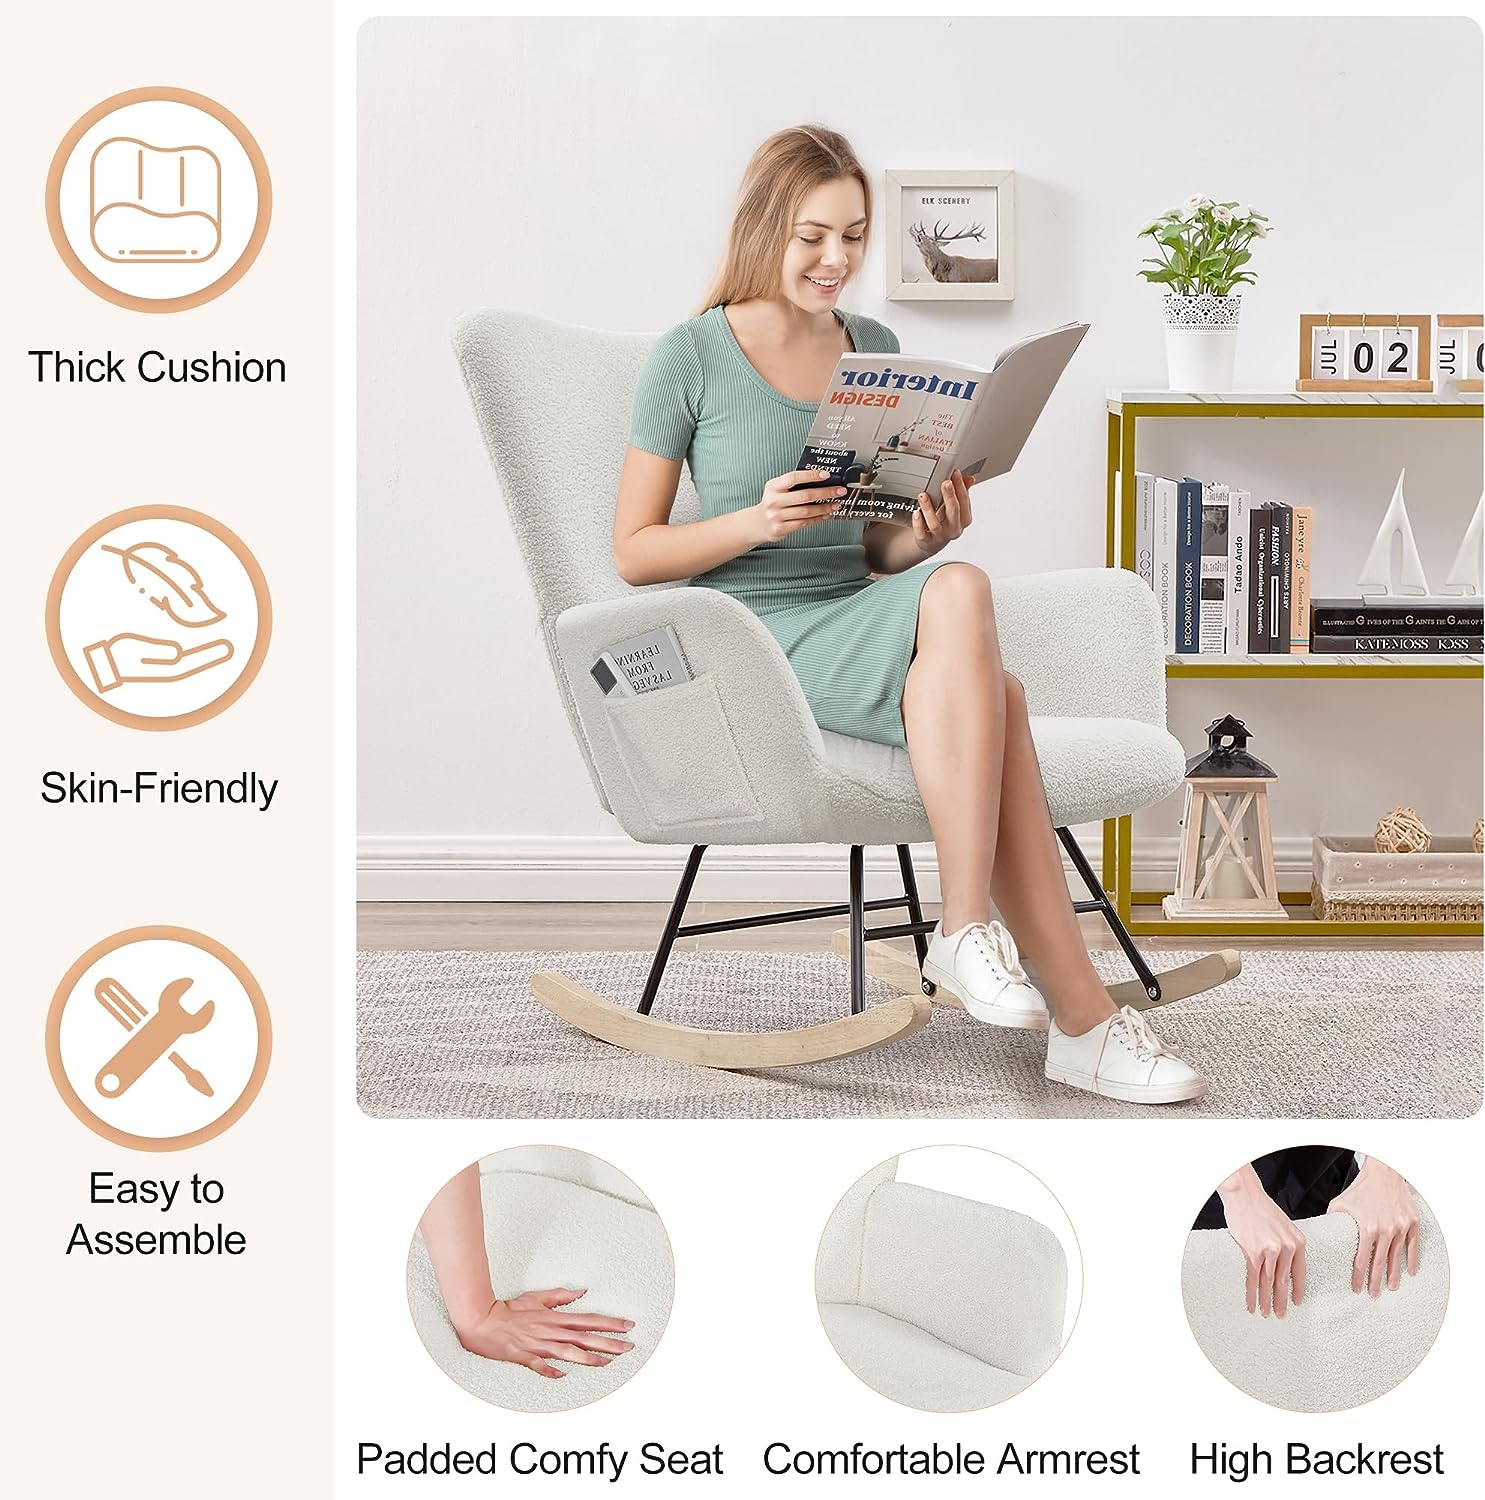 VECELO Rocking Chair, Modern Upholstered Teddy Fabric Nursery Glider with Padded Seat, High Backrest, Armchair and Pocket for Living Room Bedroom Balcony Offices